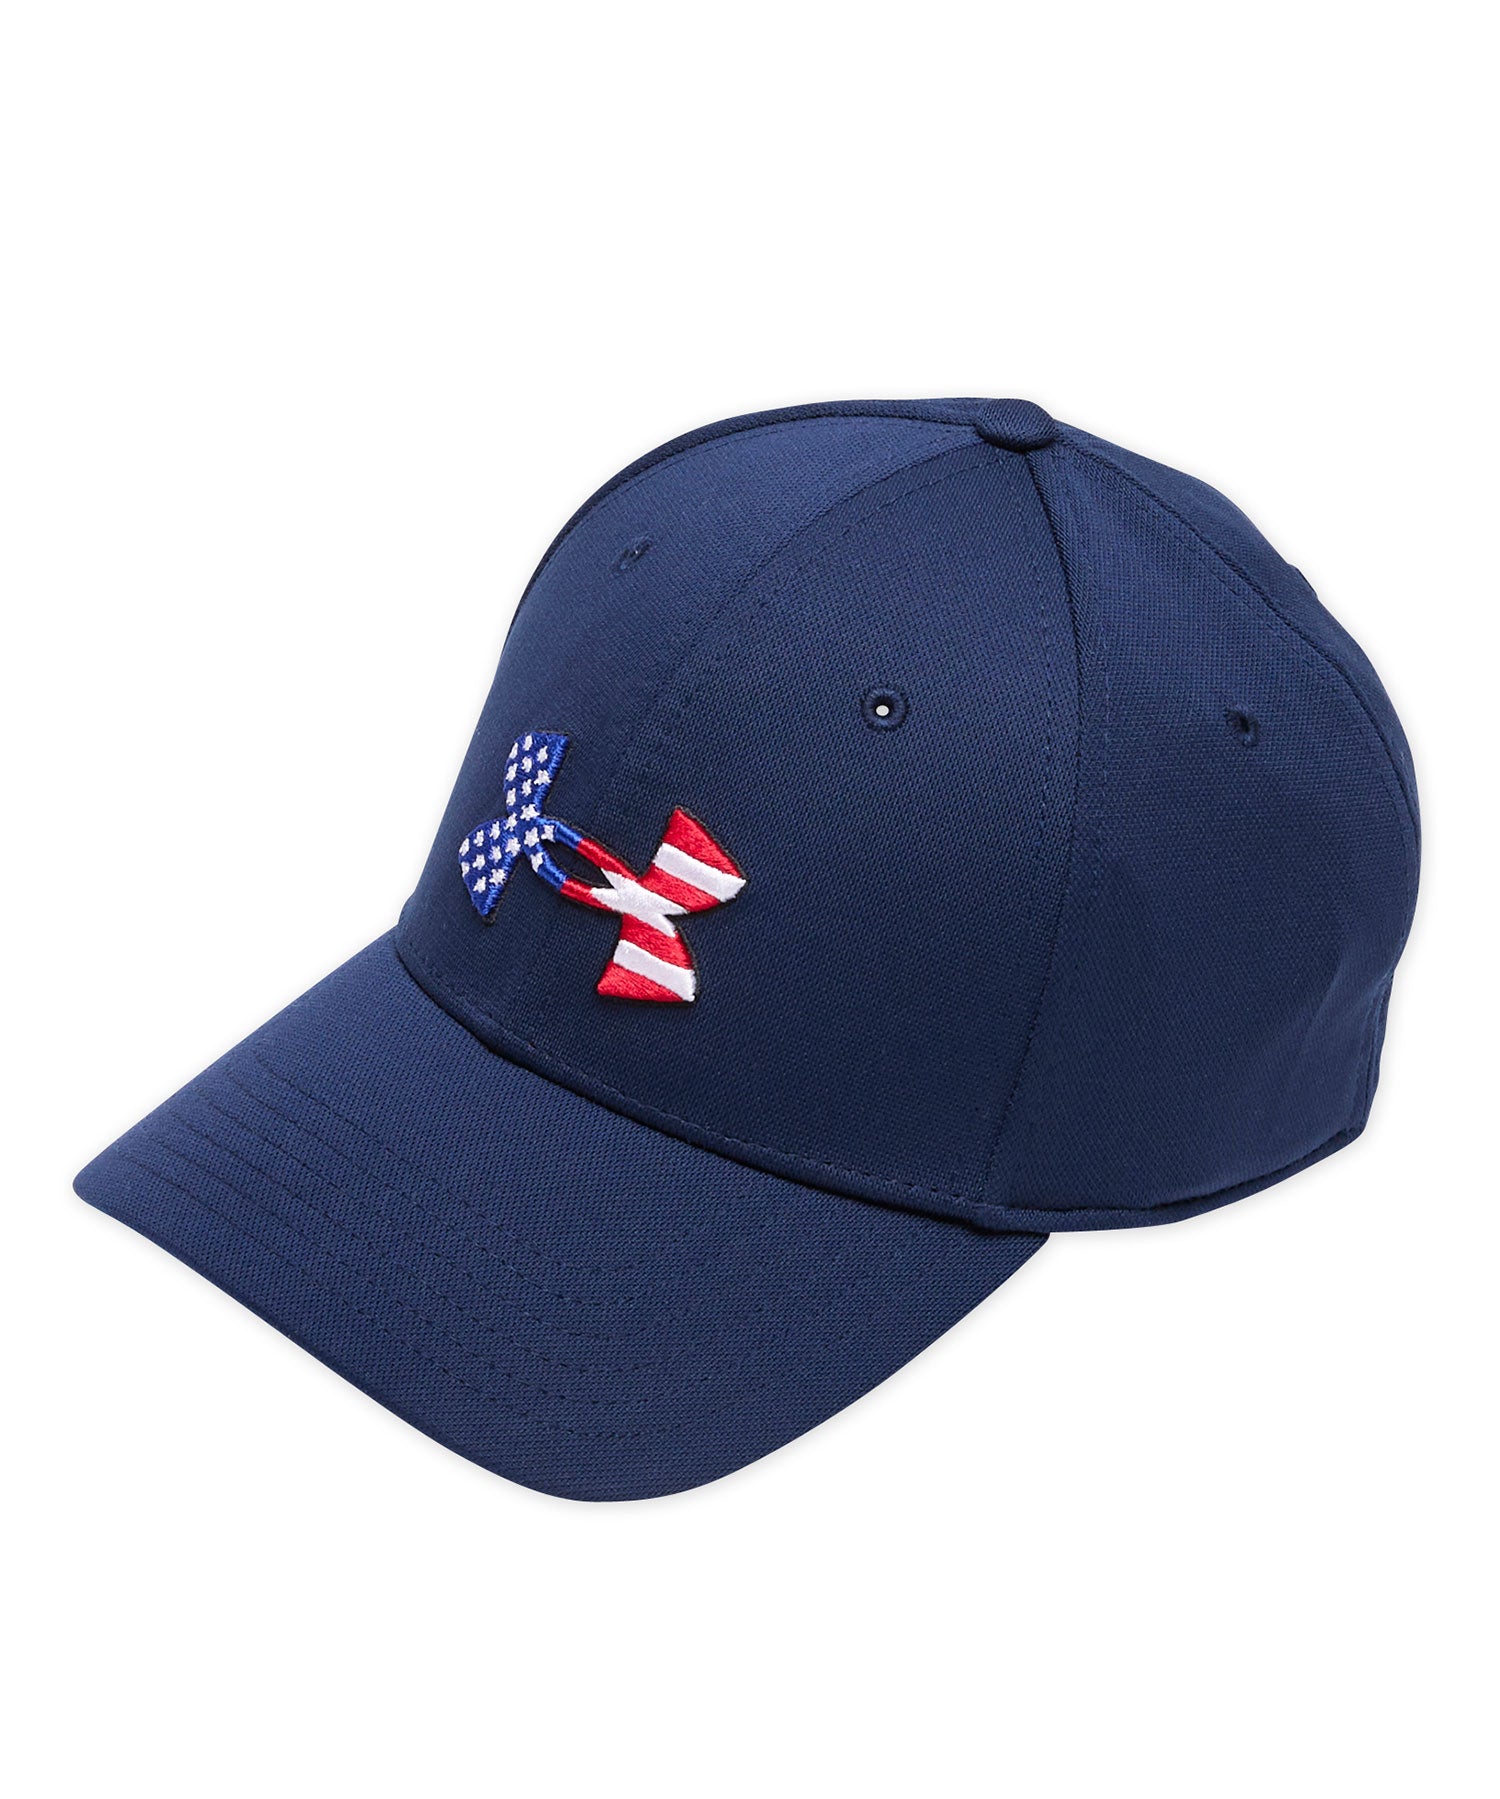 Under Armour Freedom Blitzing Hat, Men's Big & Tall